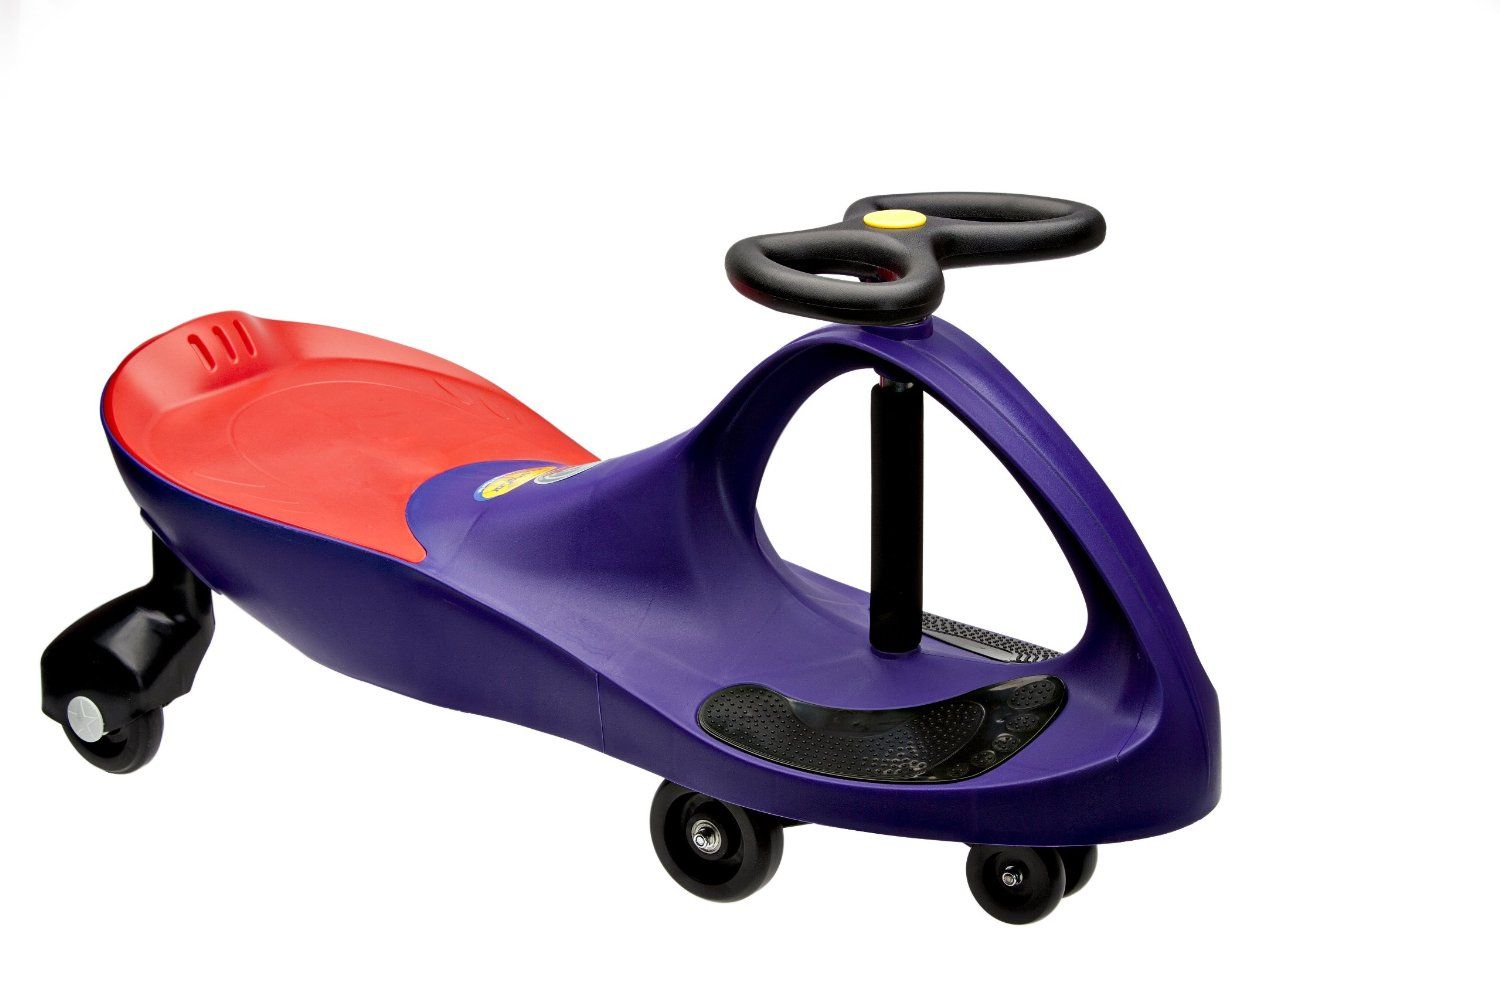 Best gifts for a 4 year old: PlasmaCar